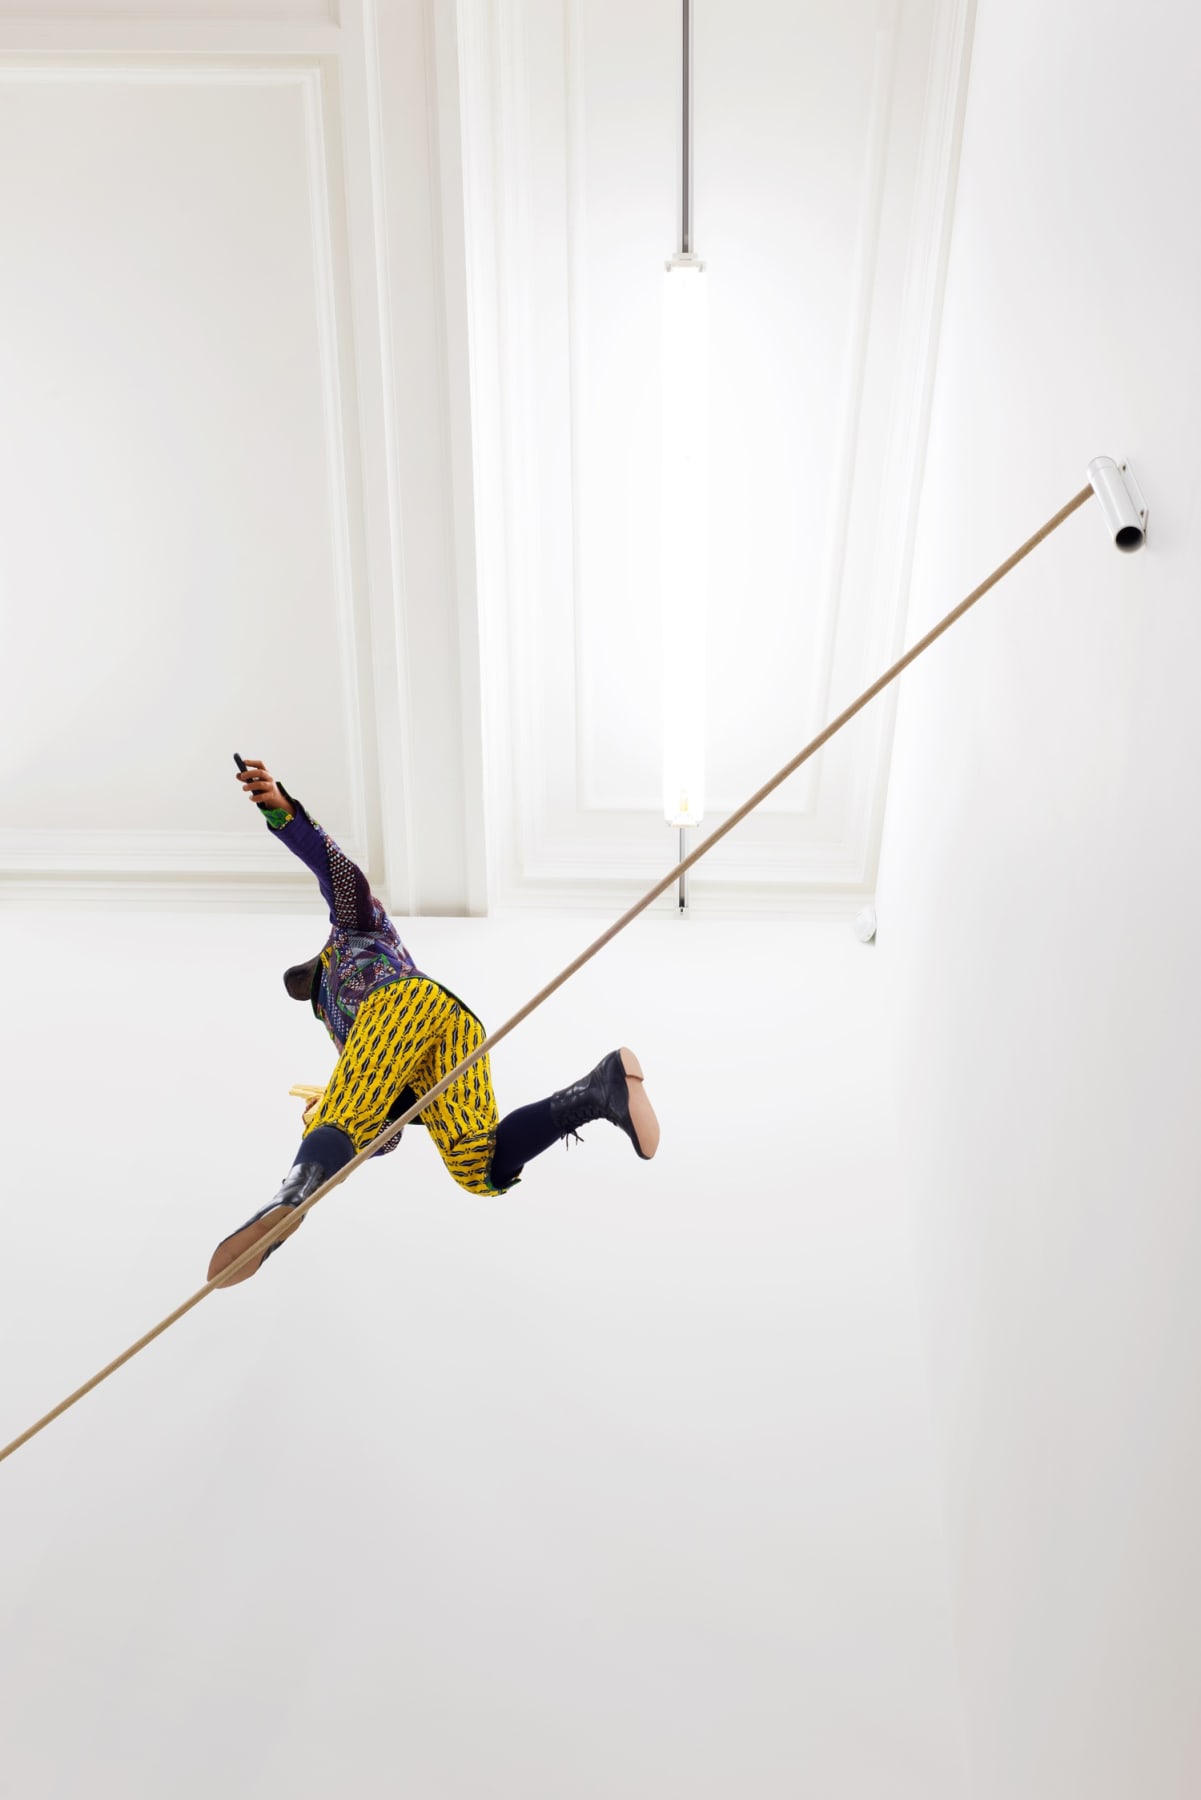 Installation view from underneath of miniature figure with a cow head and human body in wildly colored garments on a tightrope clutching a gun.